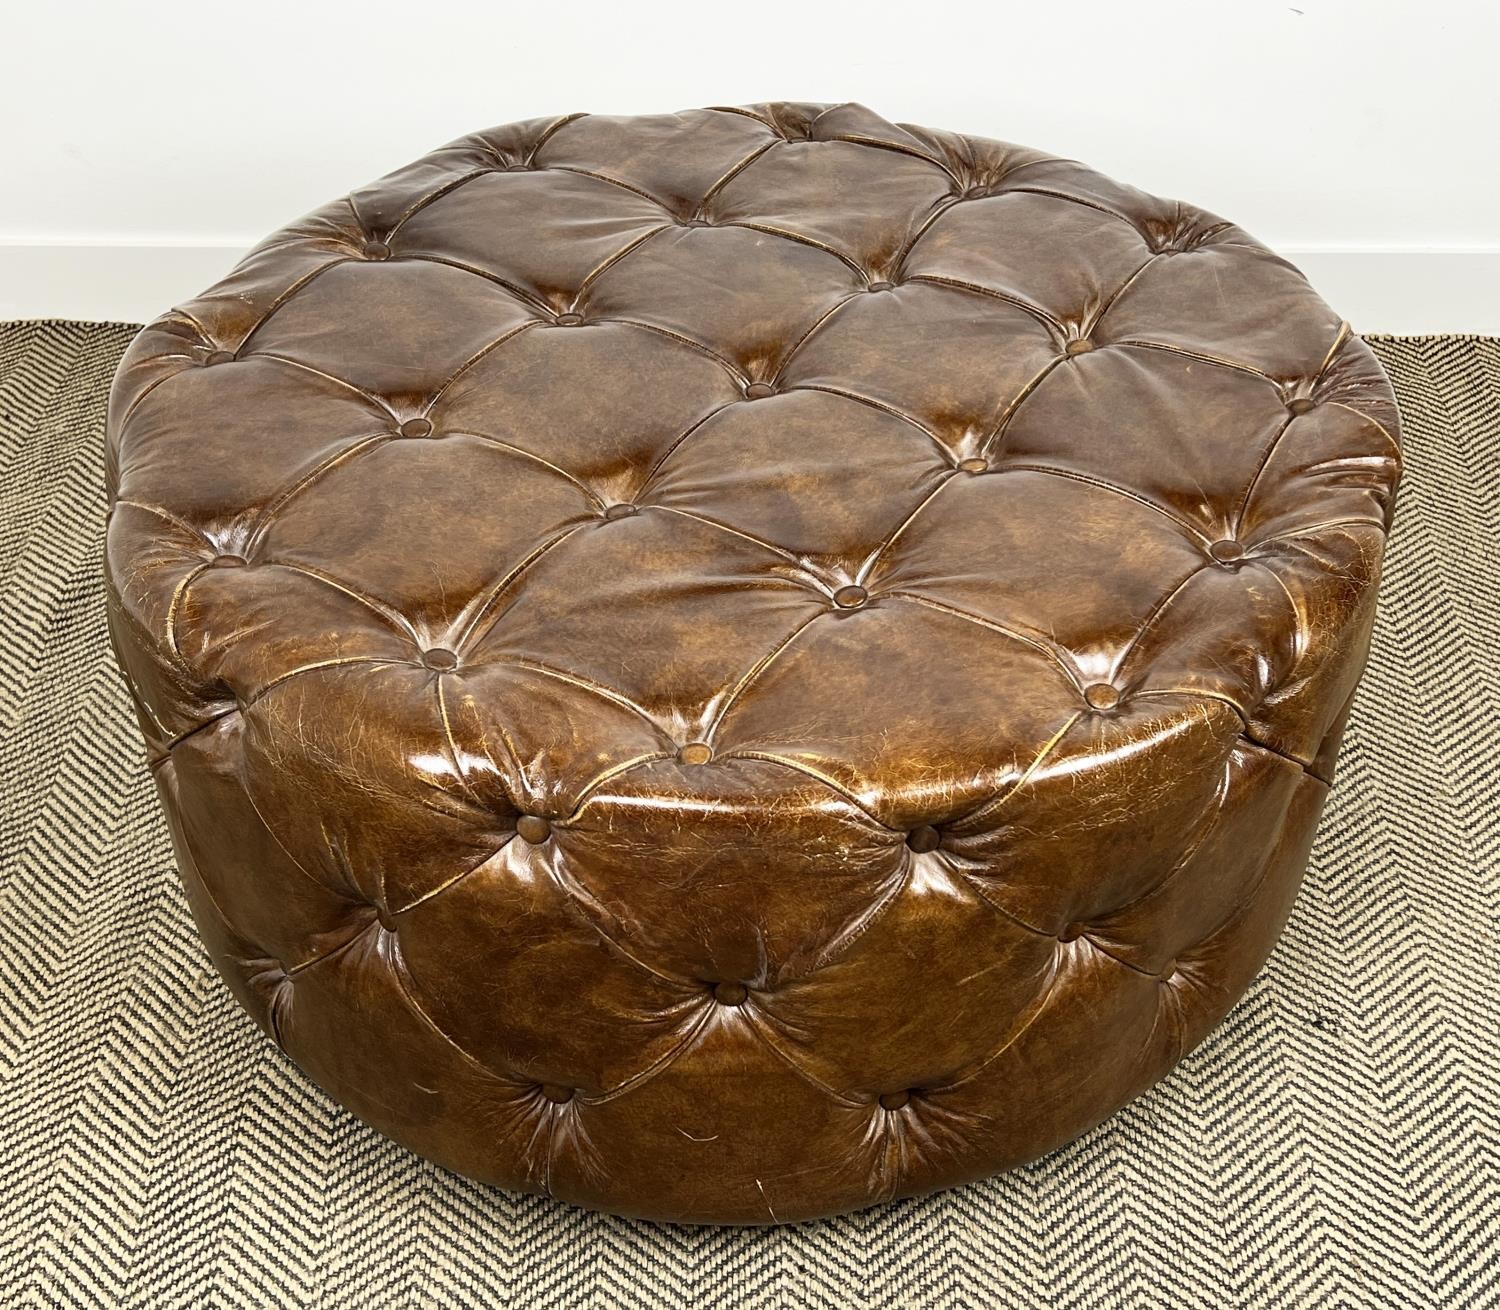 FOOTSTOOL, revolving buttoned hand dyed tanned leather, 55cm H x 98cm diam. - Image 2 of 5